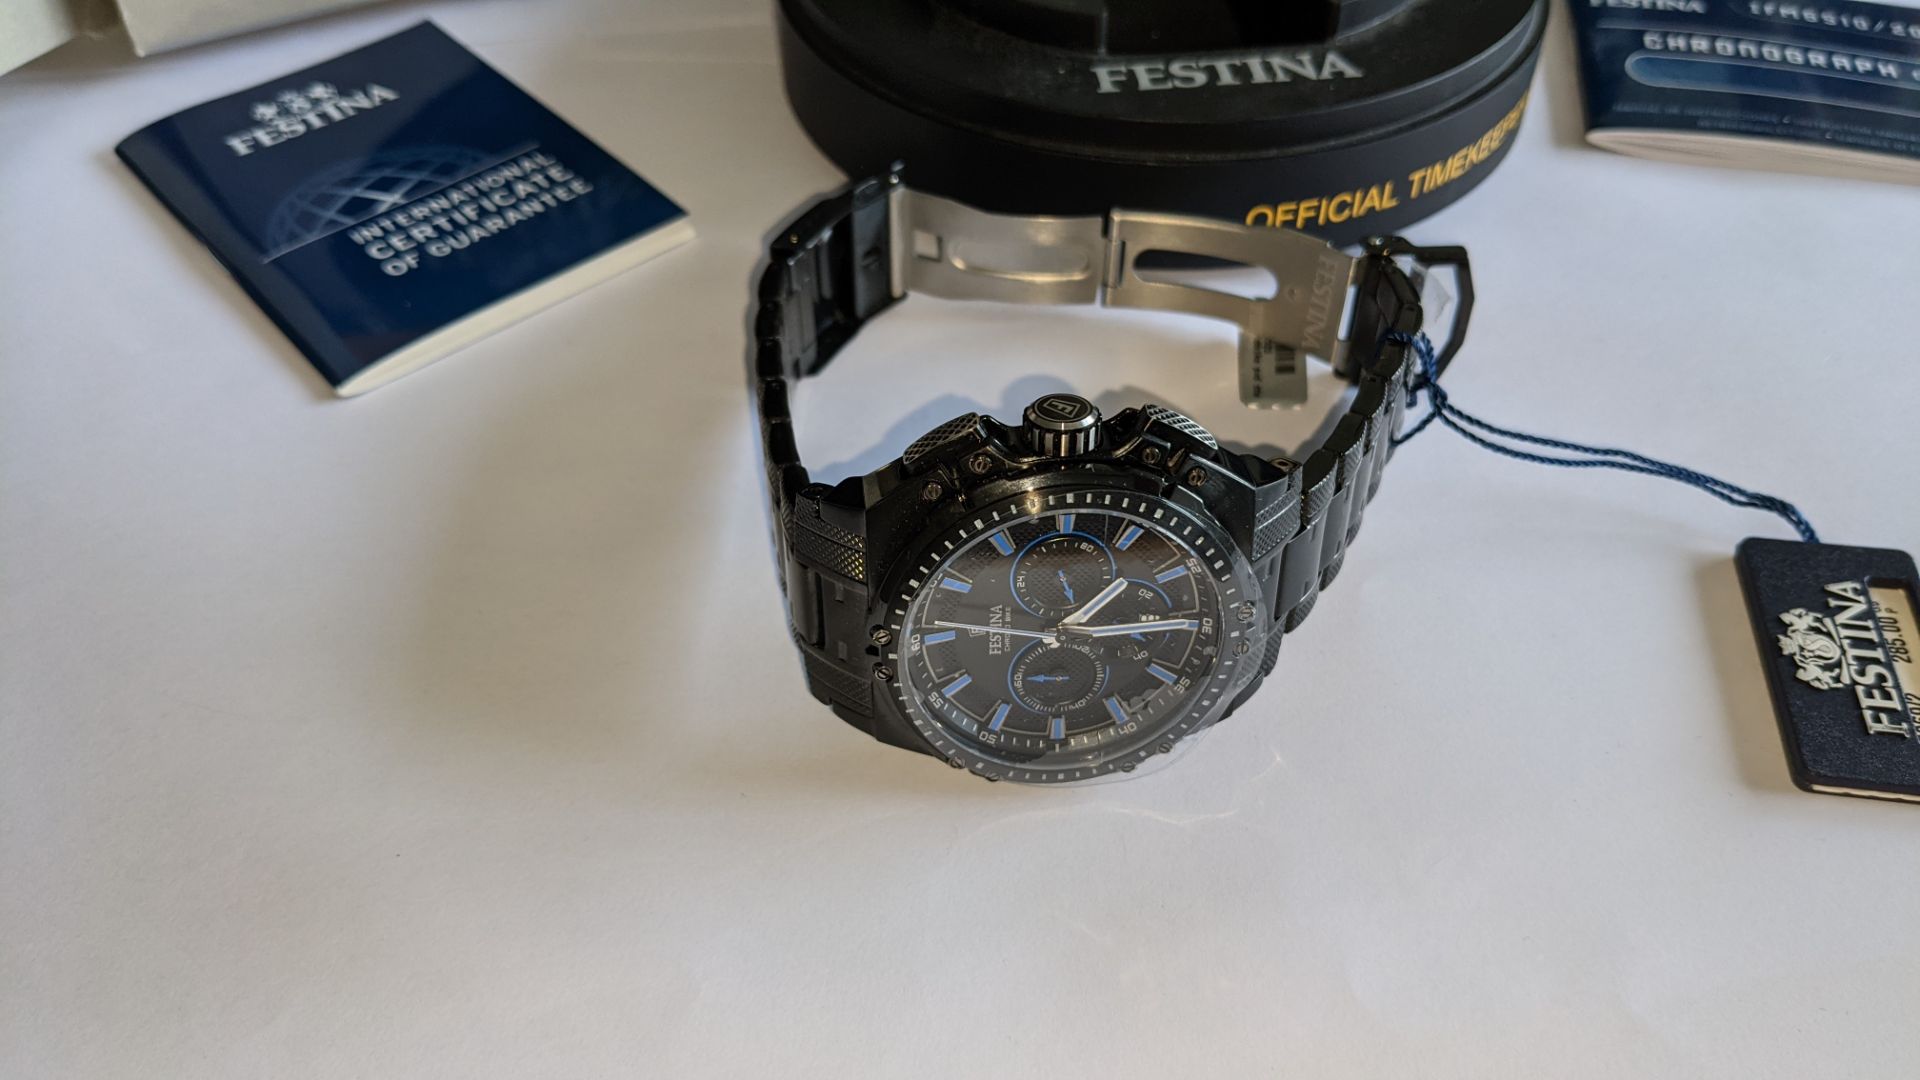 Festina stainless steel watch, reference F16969/2, 10 ATM water resistant. Includes box & book pack. - Image 9 of 25